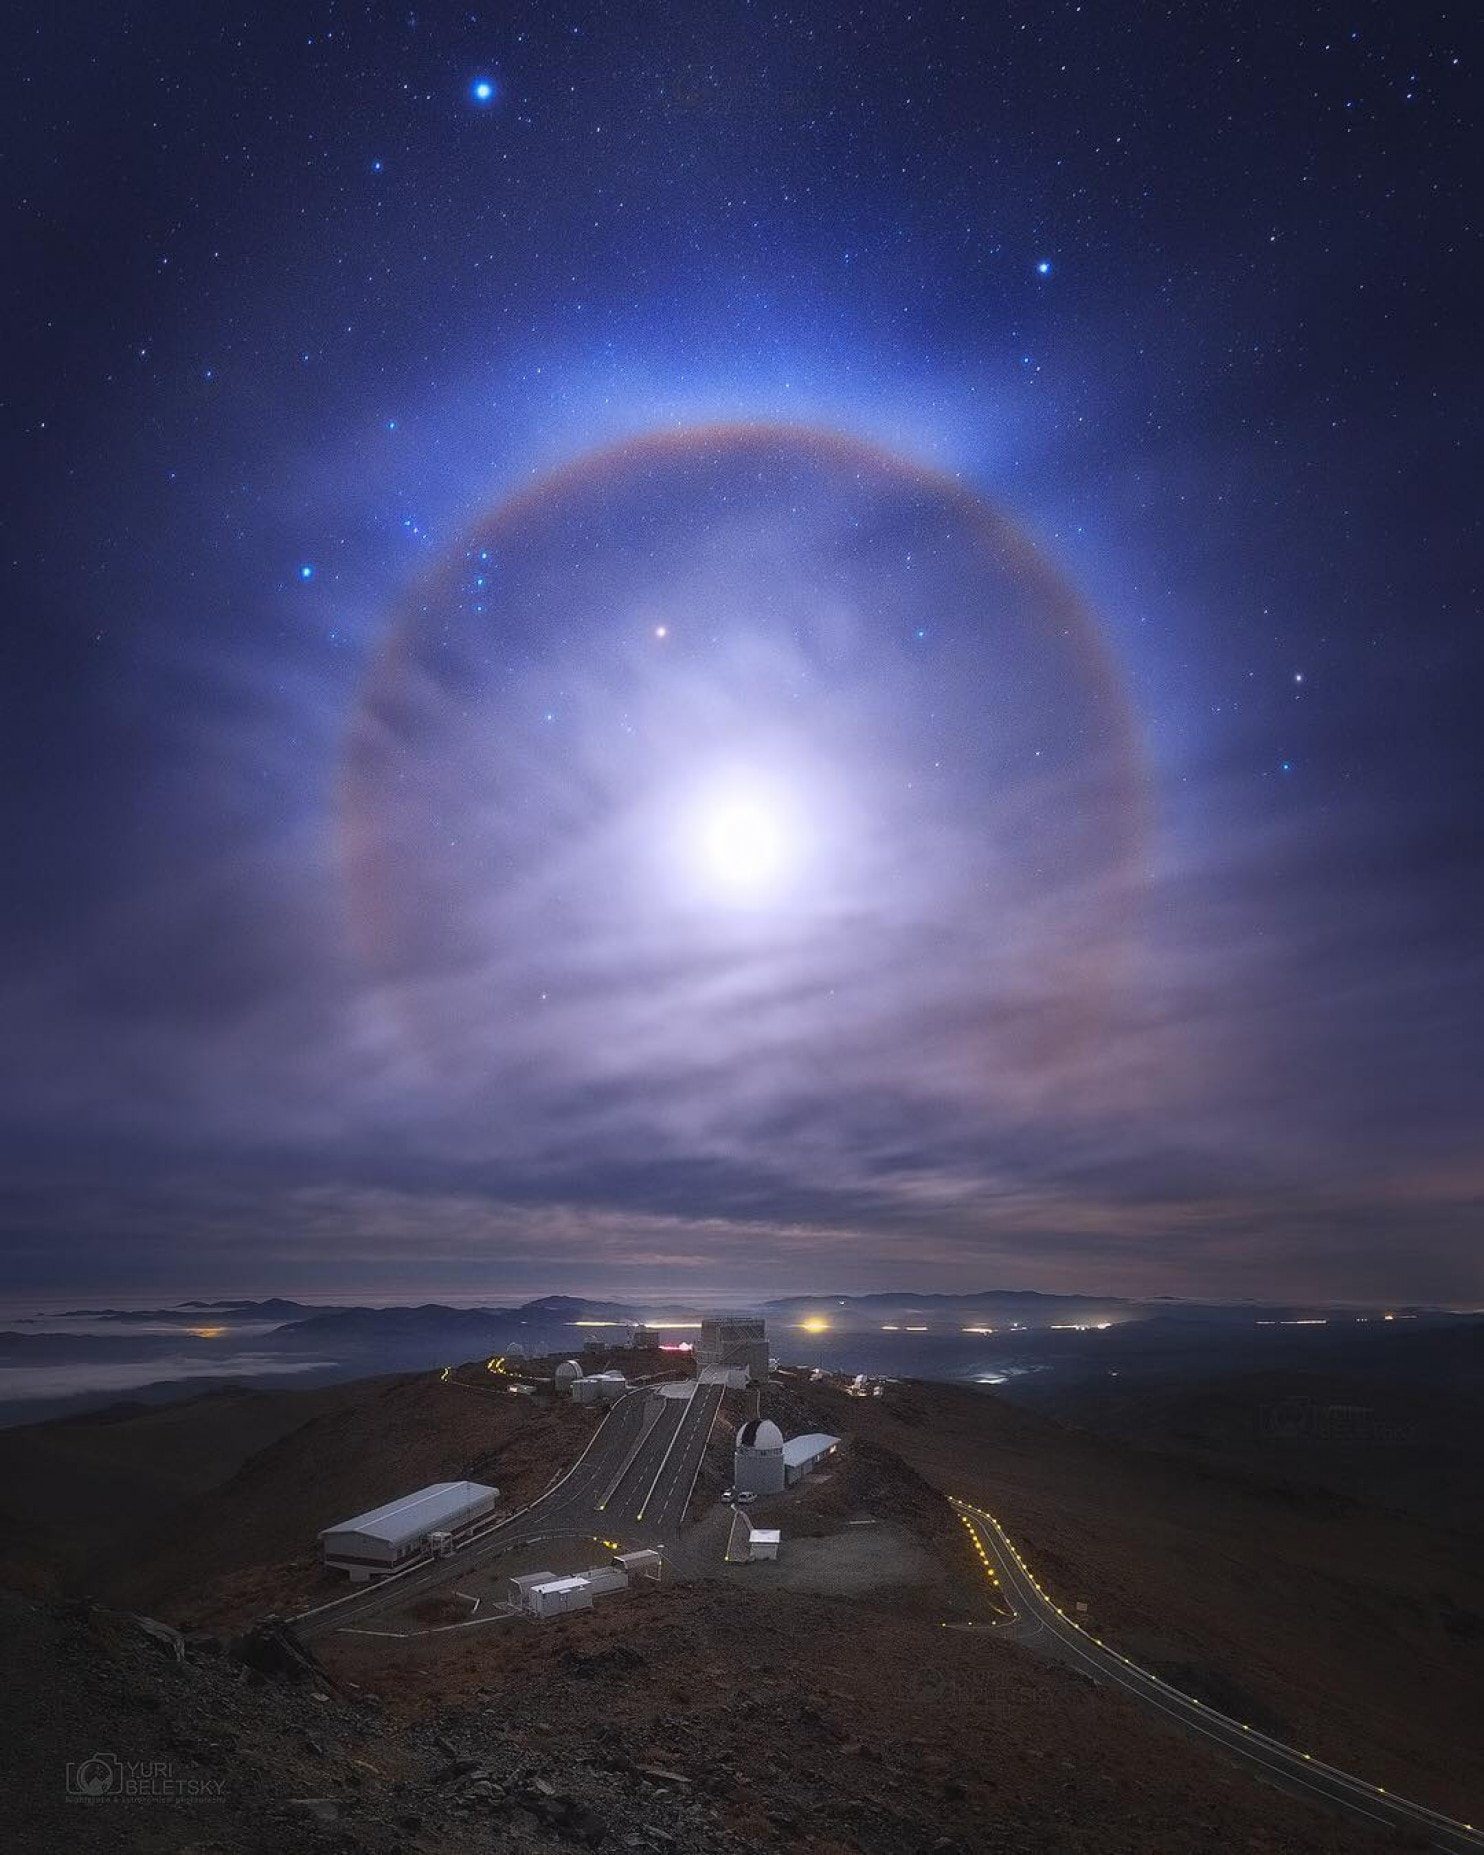 Moon halo over Chile